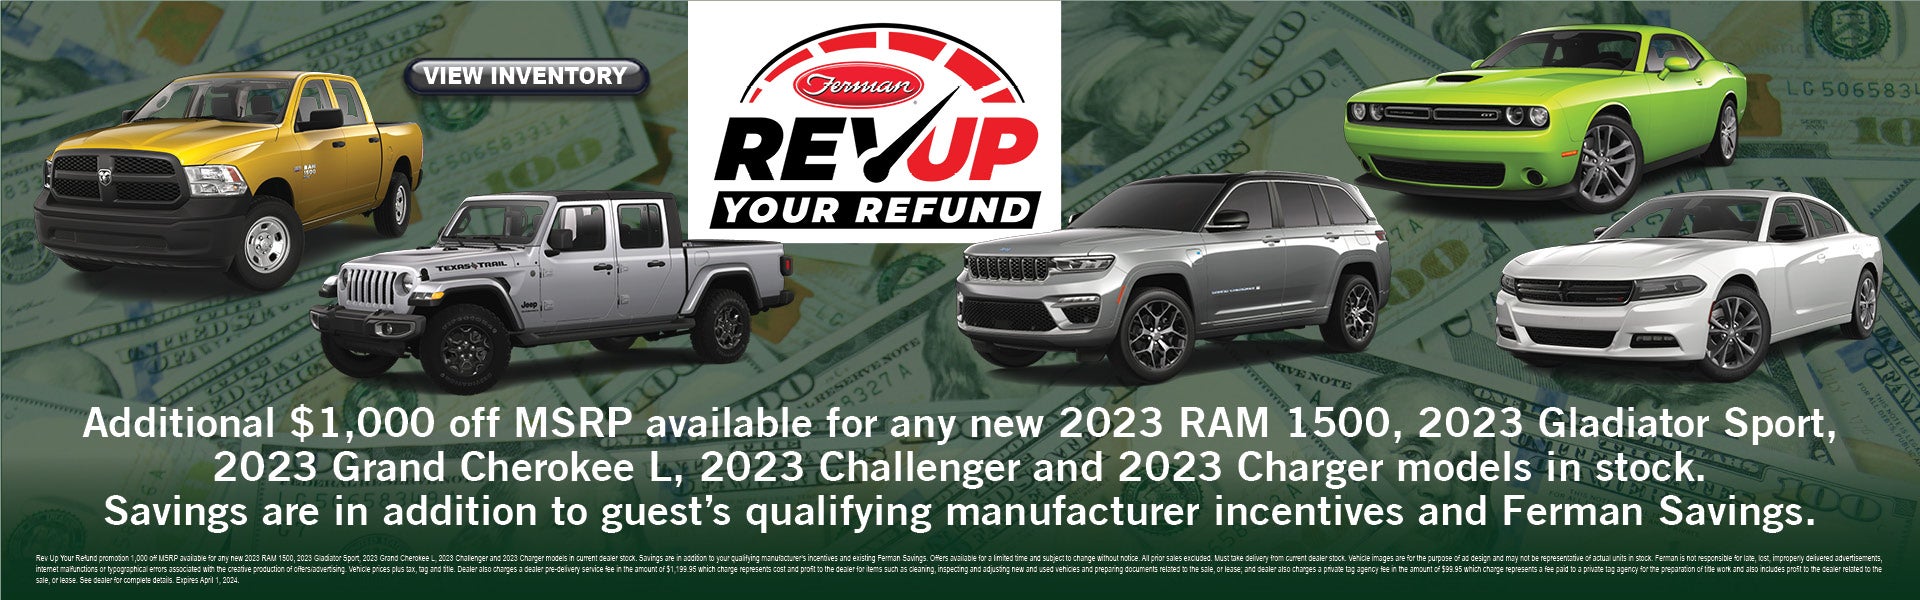 Rev Up Your Refund and save $1,000 at Ferman Wesley Chapel